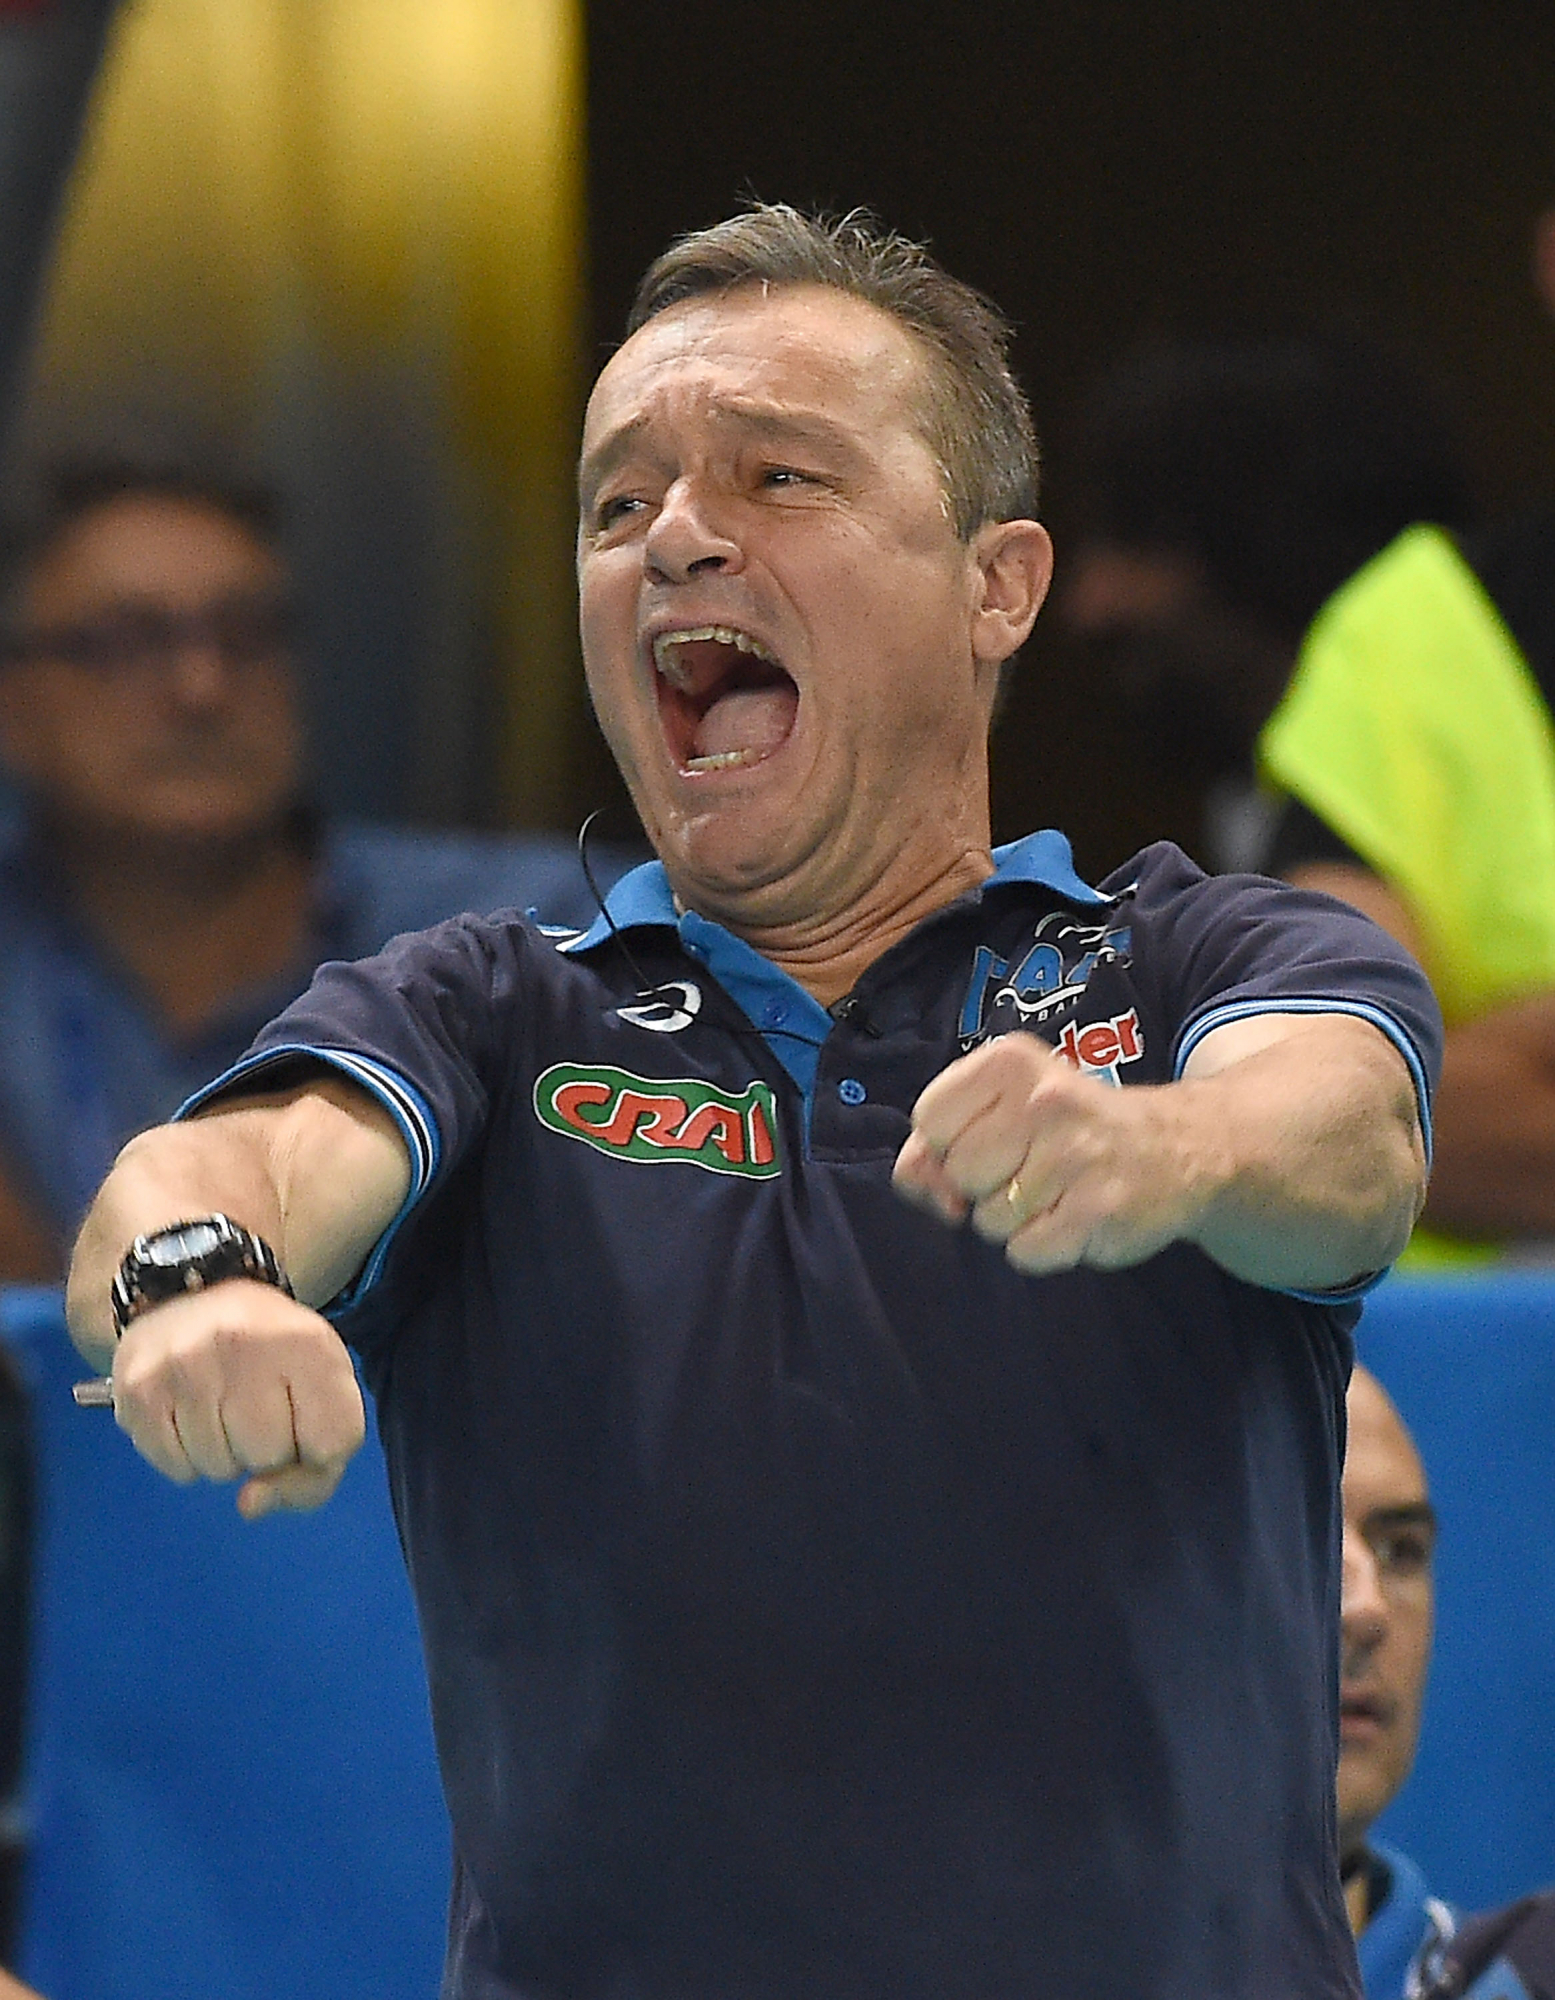 BARI, ITALY - OCTOBER 04:  Marco Bonitta head coach of Italy during the FIVB Women's World Championship pool E match between Italy and Japan on October 4, 2014 in Bari, Italy.  (Photo by Giuseppe Bellini/Getty Images for FIVB)